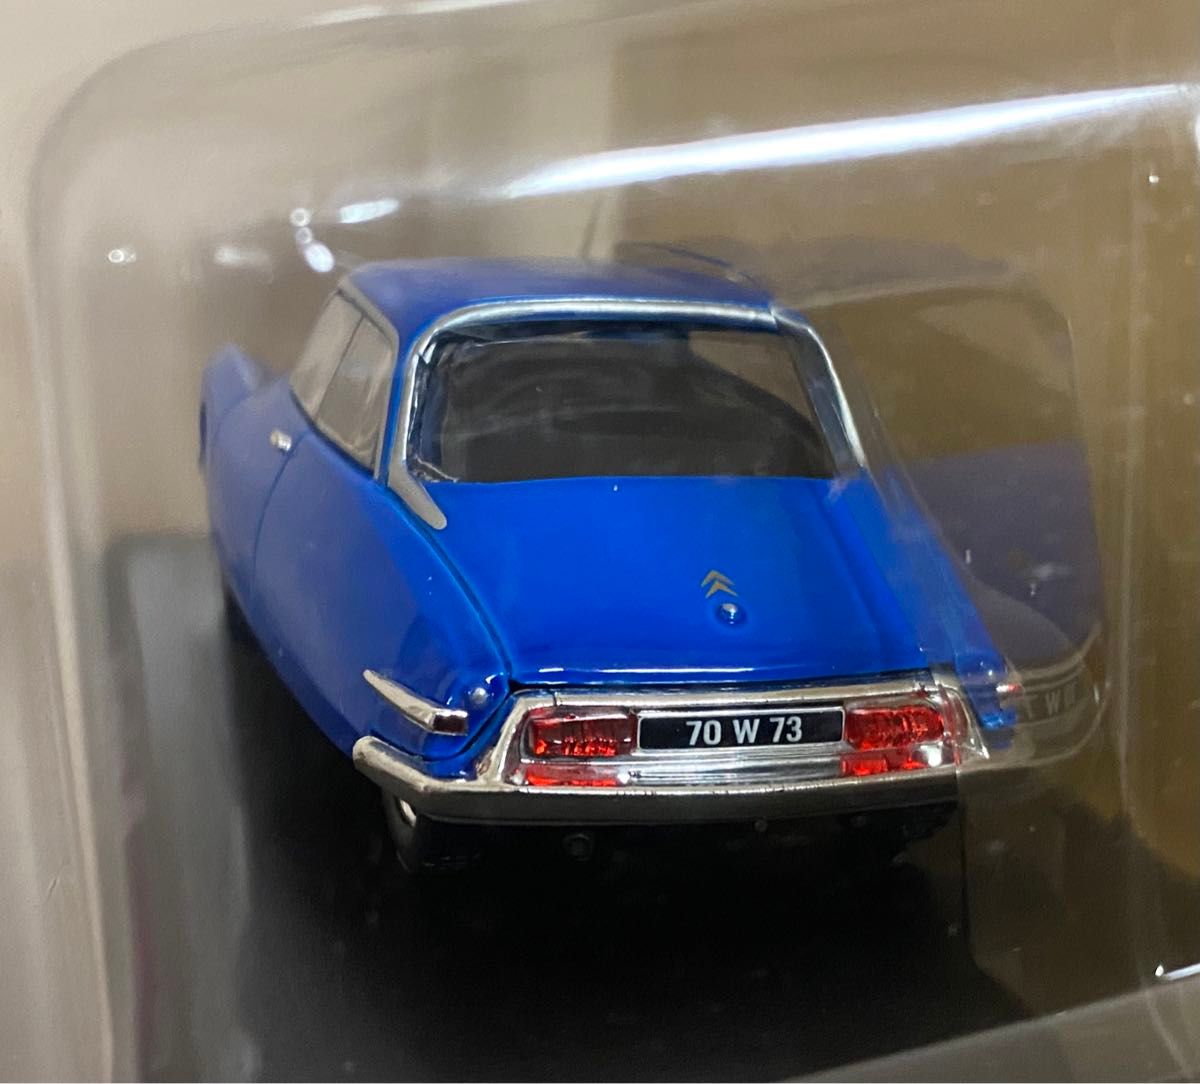 【DS Collection】シトロエン Citroen DS19 COUPE RICOU 1959 1/43